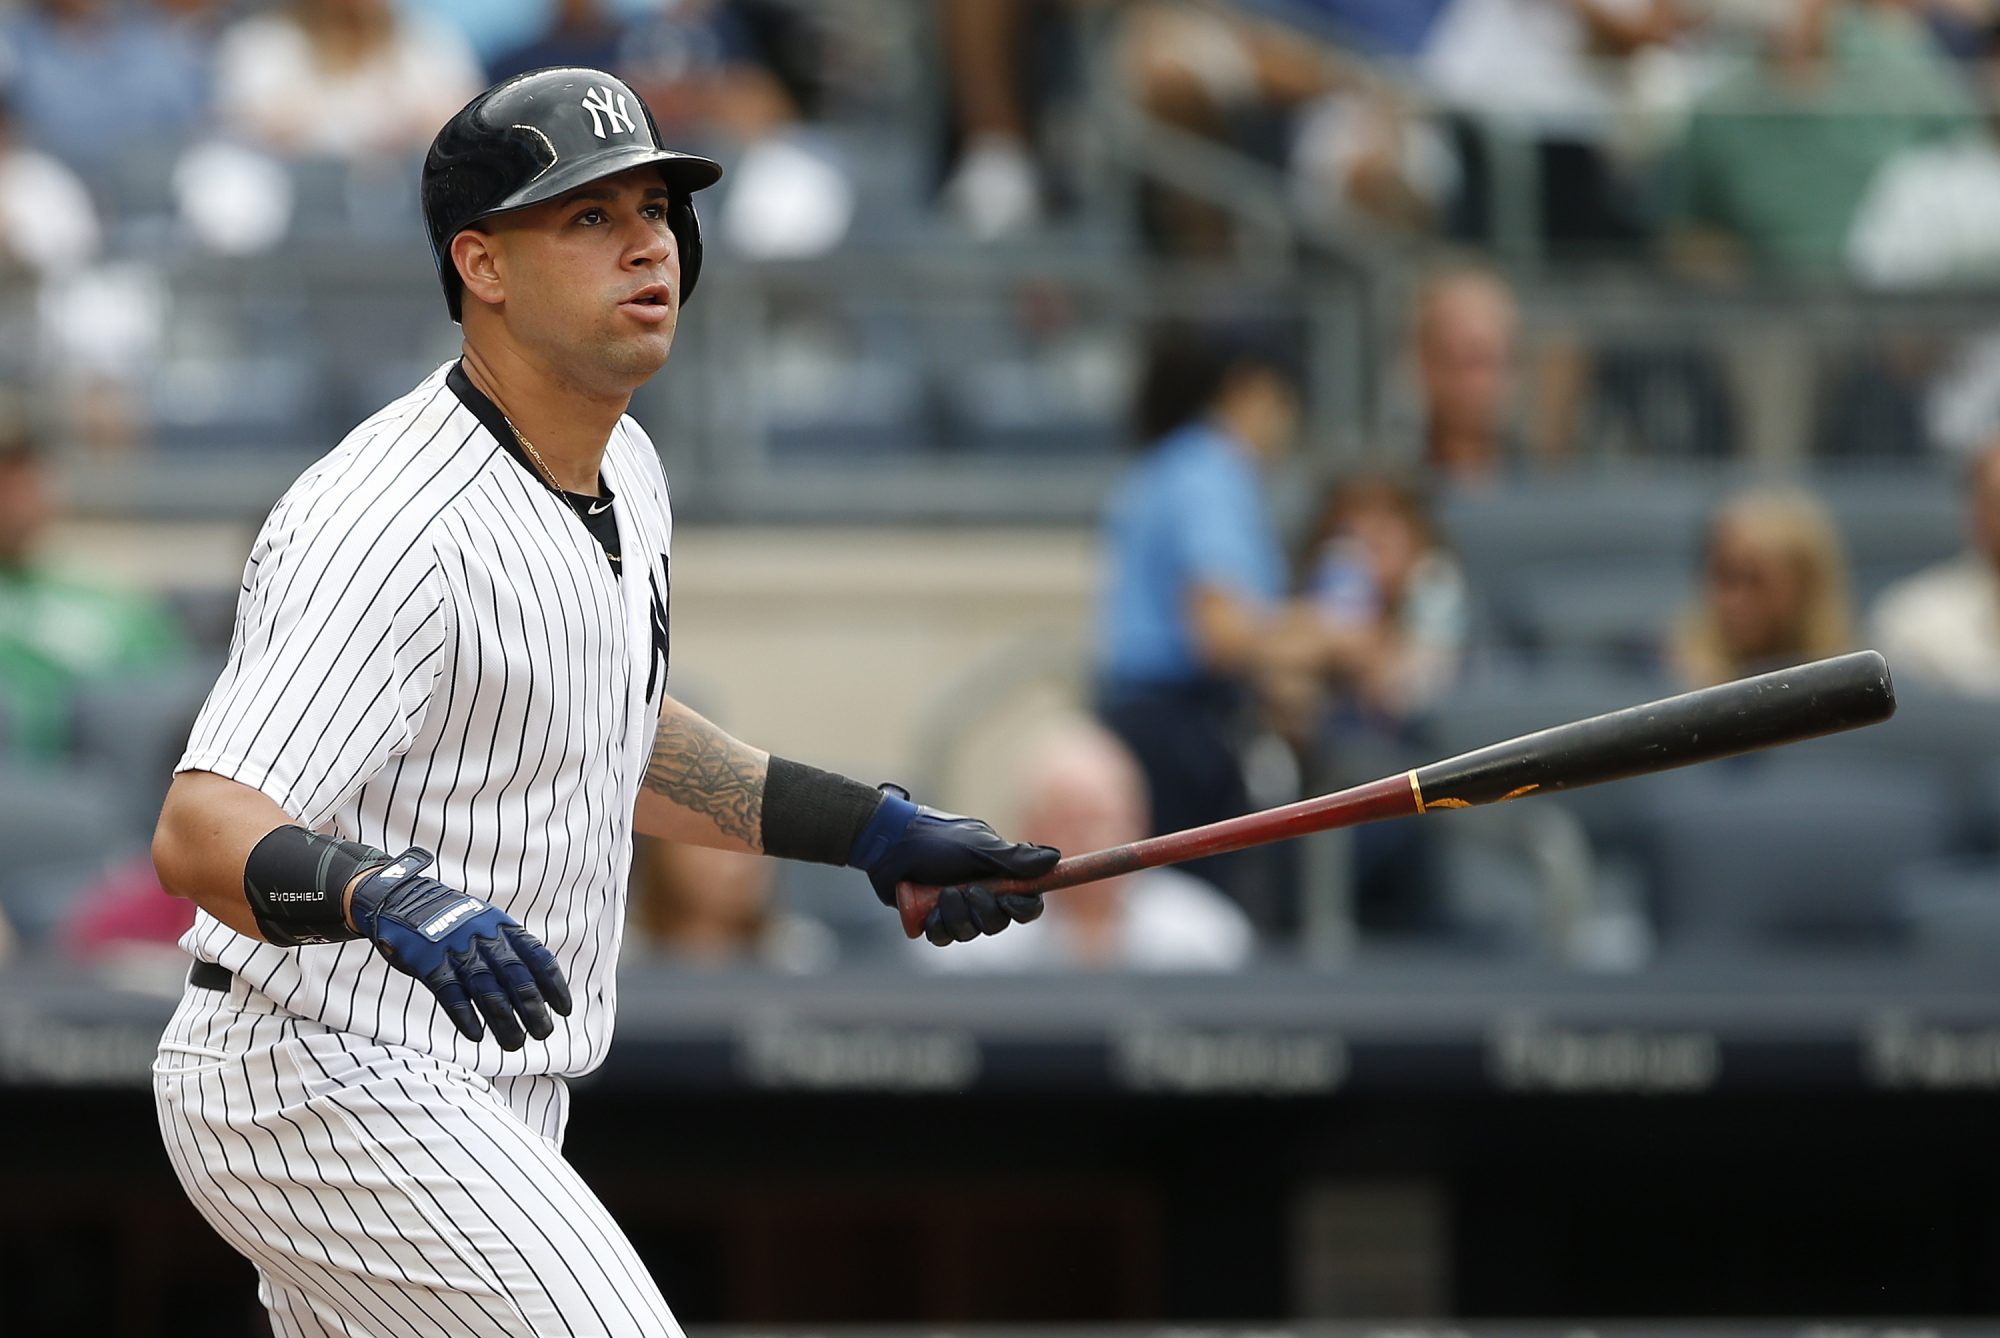 New York Yankees: Gary Sanchez's Suspension Gets Reduced 